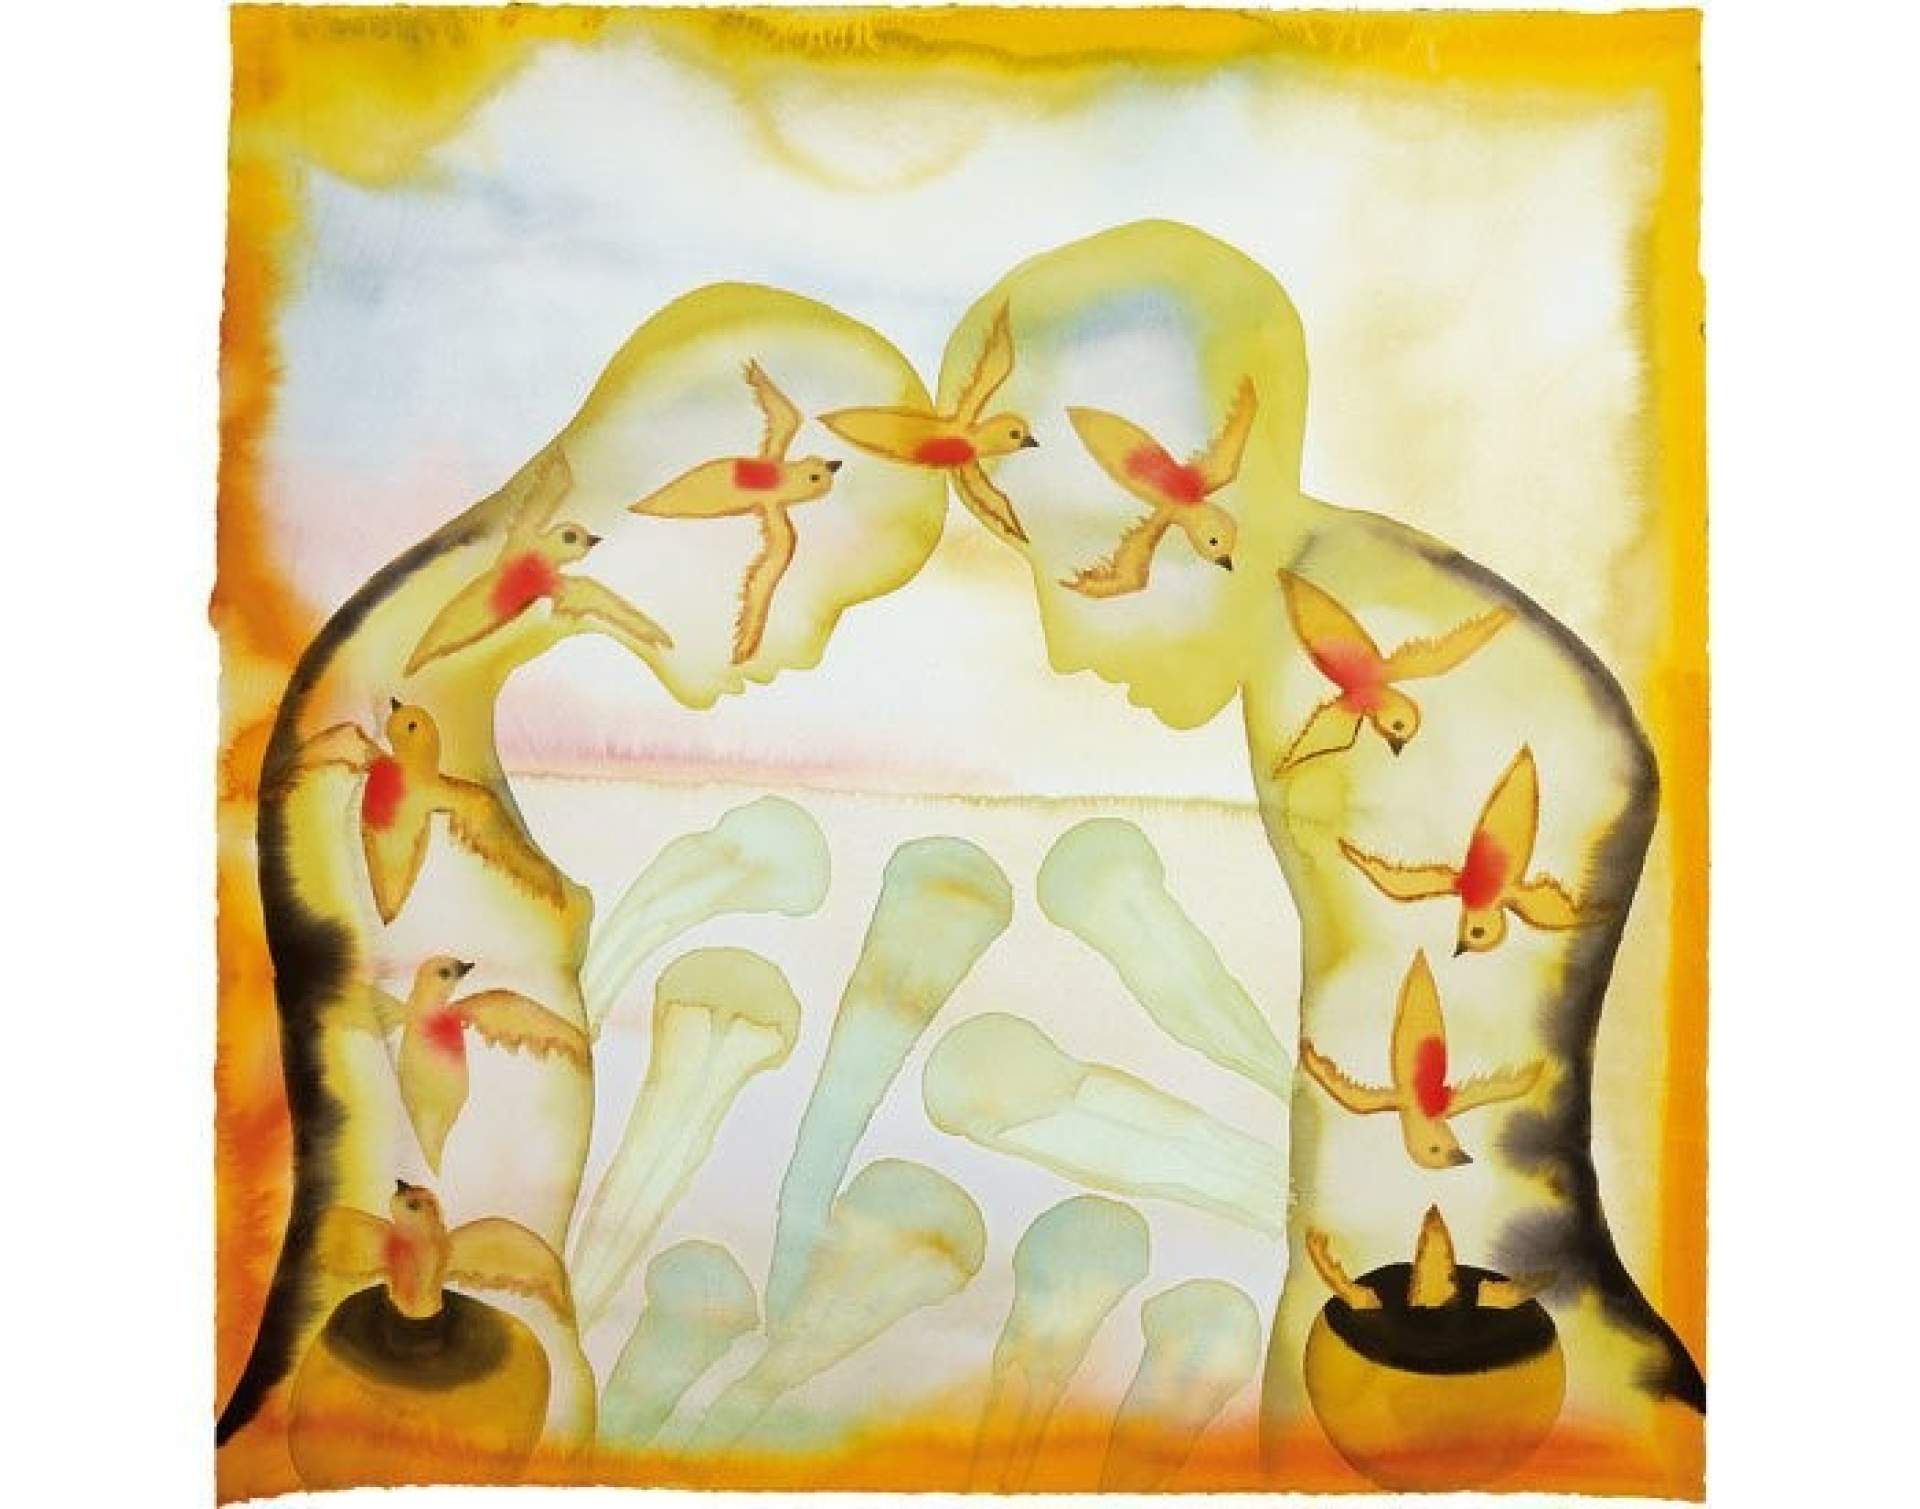 The Nature of Watercolor Painting: Francesco Clemente